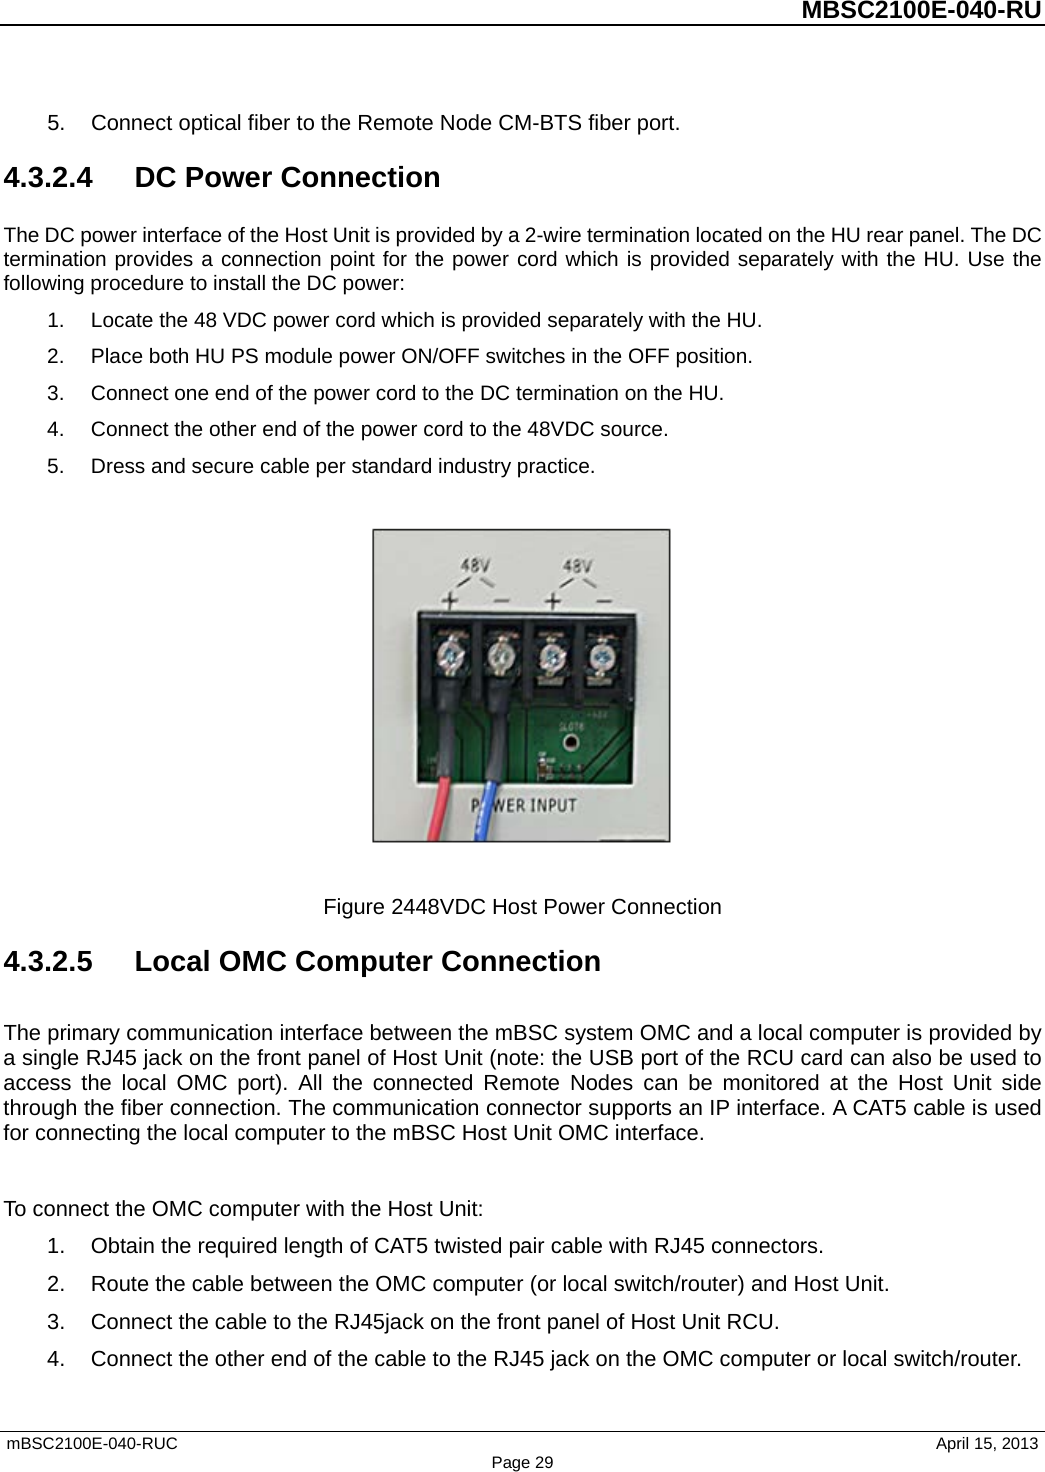          MBSC2100E-040-RU   mBSC2100E-040-RUC                                     April 15, 2013 Page 29 5. Connect optical fiber to the Remote Node CM-BTS fiber port. 4.3.2.4  DC Power Connection The DC power interface of the Host Unit is provided by a 2-wire termination located on the HU rear panel. The DC termination provides a connection point for the power cord which is provided separately with the HU. Use the following procedure to install the DC power: 1. Locate the 48 VDC power cord which is provided separately with the HU.   2. Place both HU PS module power ON/OFF switches in the OFF position. 3. Connect one end of the power cord to the DC termination on the HU. 4. Connect the other end of the power cord to the 48VDC source. 5. Dress and secure cable per standard industry practice.    Figure 2448VDC Host Power Connection 4.3.2.5 Local OMC Computer Connection The primary communication interface between the mBSC system OMC and a local computer is provided by a single RJ45 jack on the front panel of Host Unit (note: the USB port of the RCU card can also be used to access the local OMC port). All the connected Remote Nodes can be monitored at the Host Unit side through the fiber connection. The communication connector supports an IP interface. A CAT5 cable is used for connecting the local computer to the mBSC Host Unit OMC interface.  To connect the OMC computer with the Host Unit: 1. Obtain the required length of CAT5 twisted pair cable with RJ45 connectors. 2. Route the cable between the OMC computer (or local switch/router) and Host Unit. 3. Connect the cable to the RJ45jack on the front panel of Host Unit RCU. 4. Connect the other end of the cable to the RJ45 jack on the OMC computer or local switch/router. 